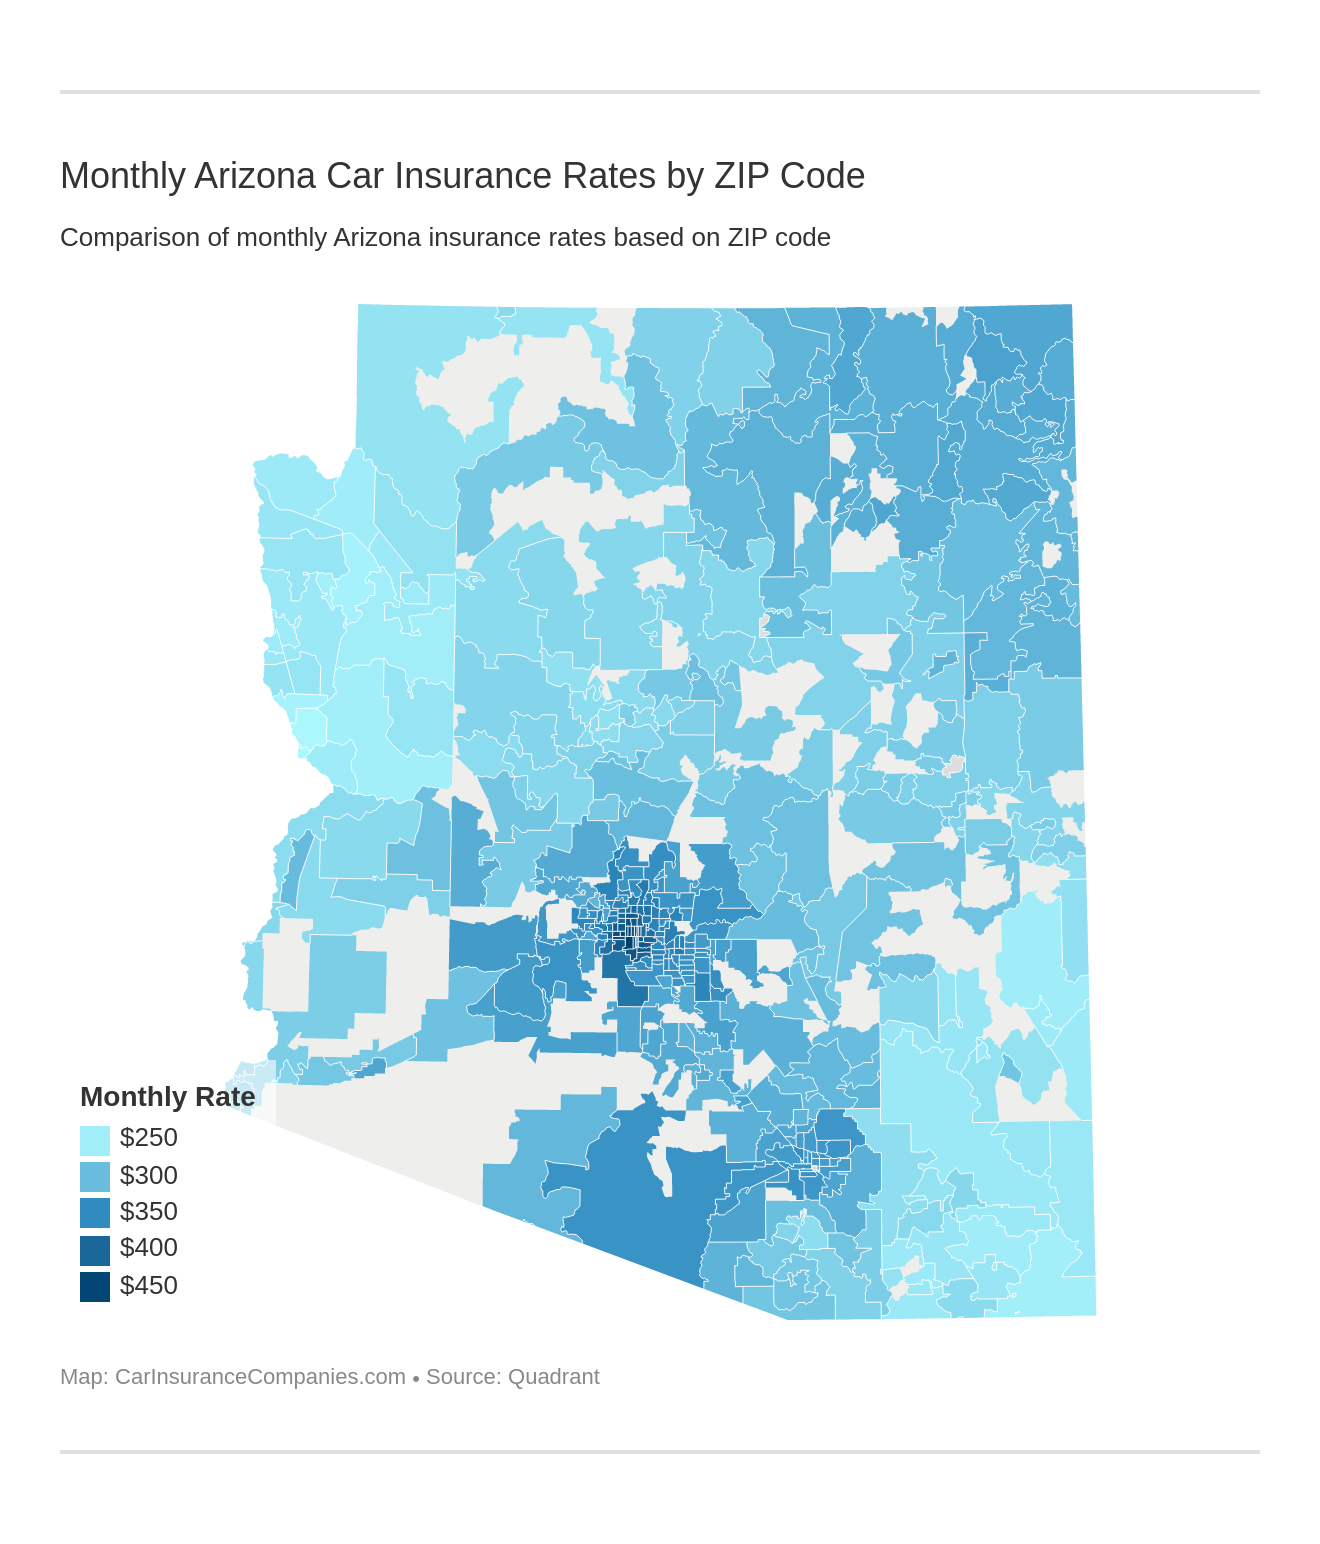 Monthly Arizona Car Insurance Rates by ZIP Code